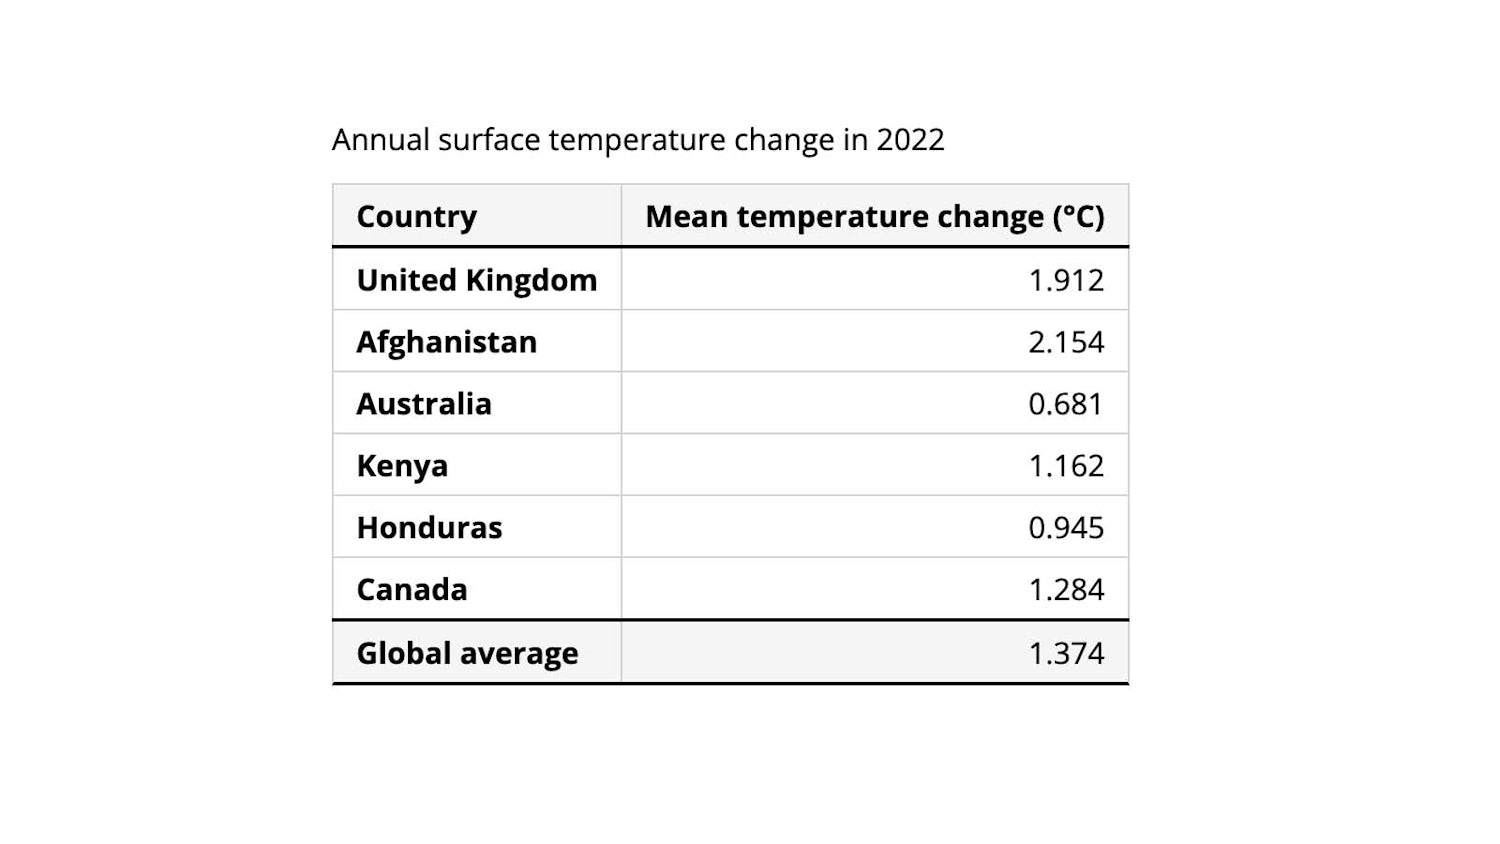 A nicely styled HTML table showing average temperature changes for the United Kingdom, Afghanistan, Australia, Kenya, Honduras and Canada along with a global average